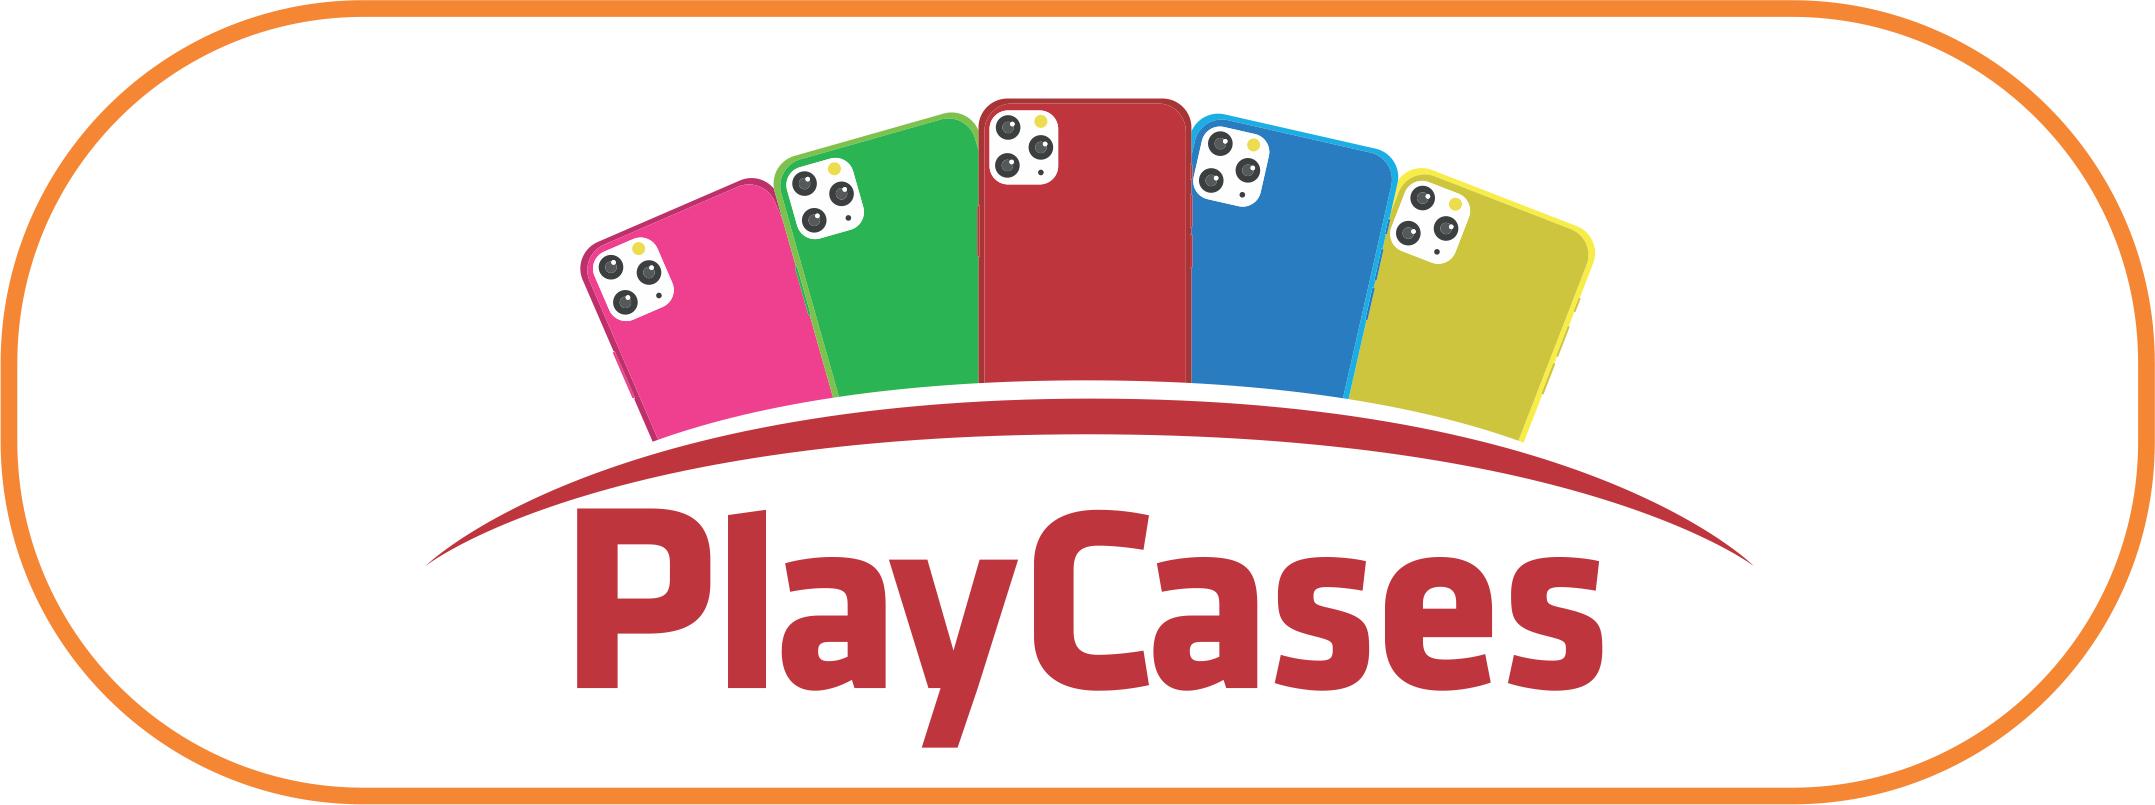 PlayCases